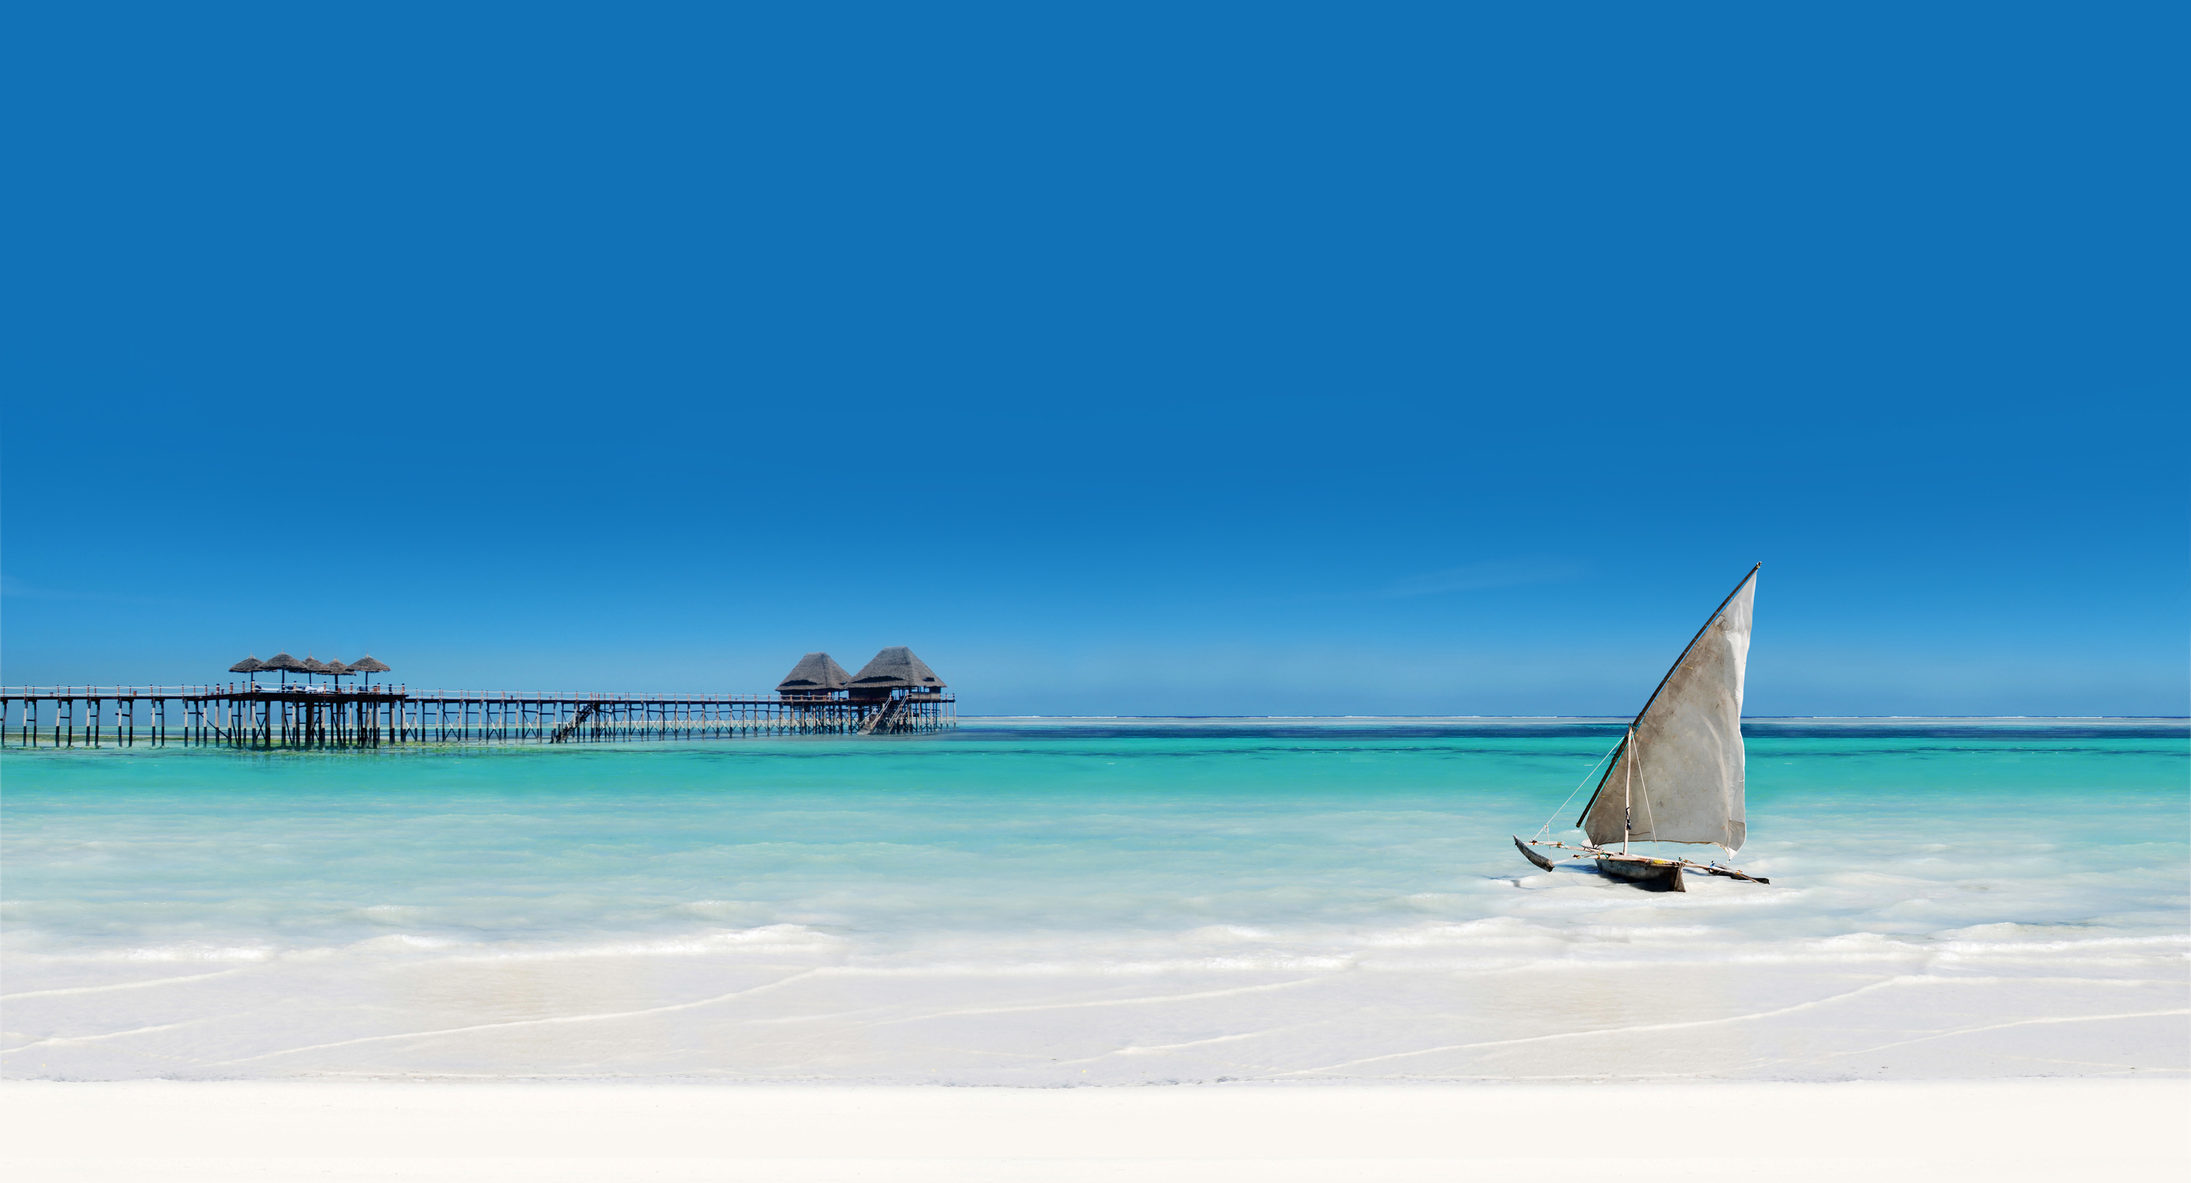 Witness extraordinary Zanzibar beachscape like this blazing white sand and azure Indian Ocean when you take a tailor-made holiday with Alfred&.